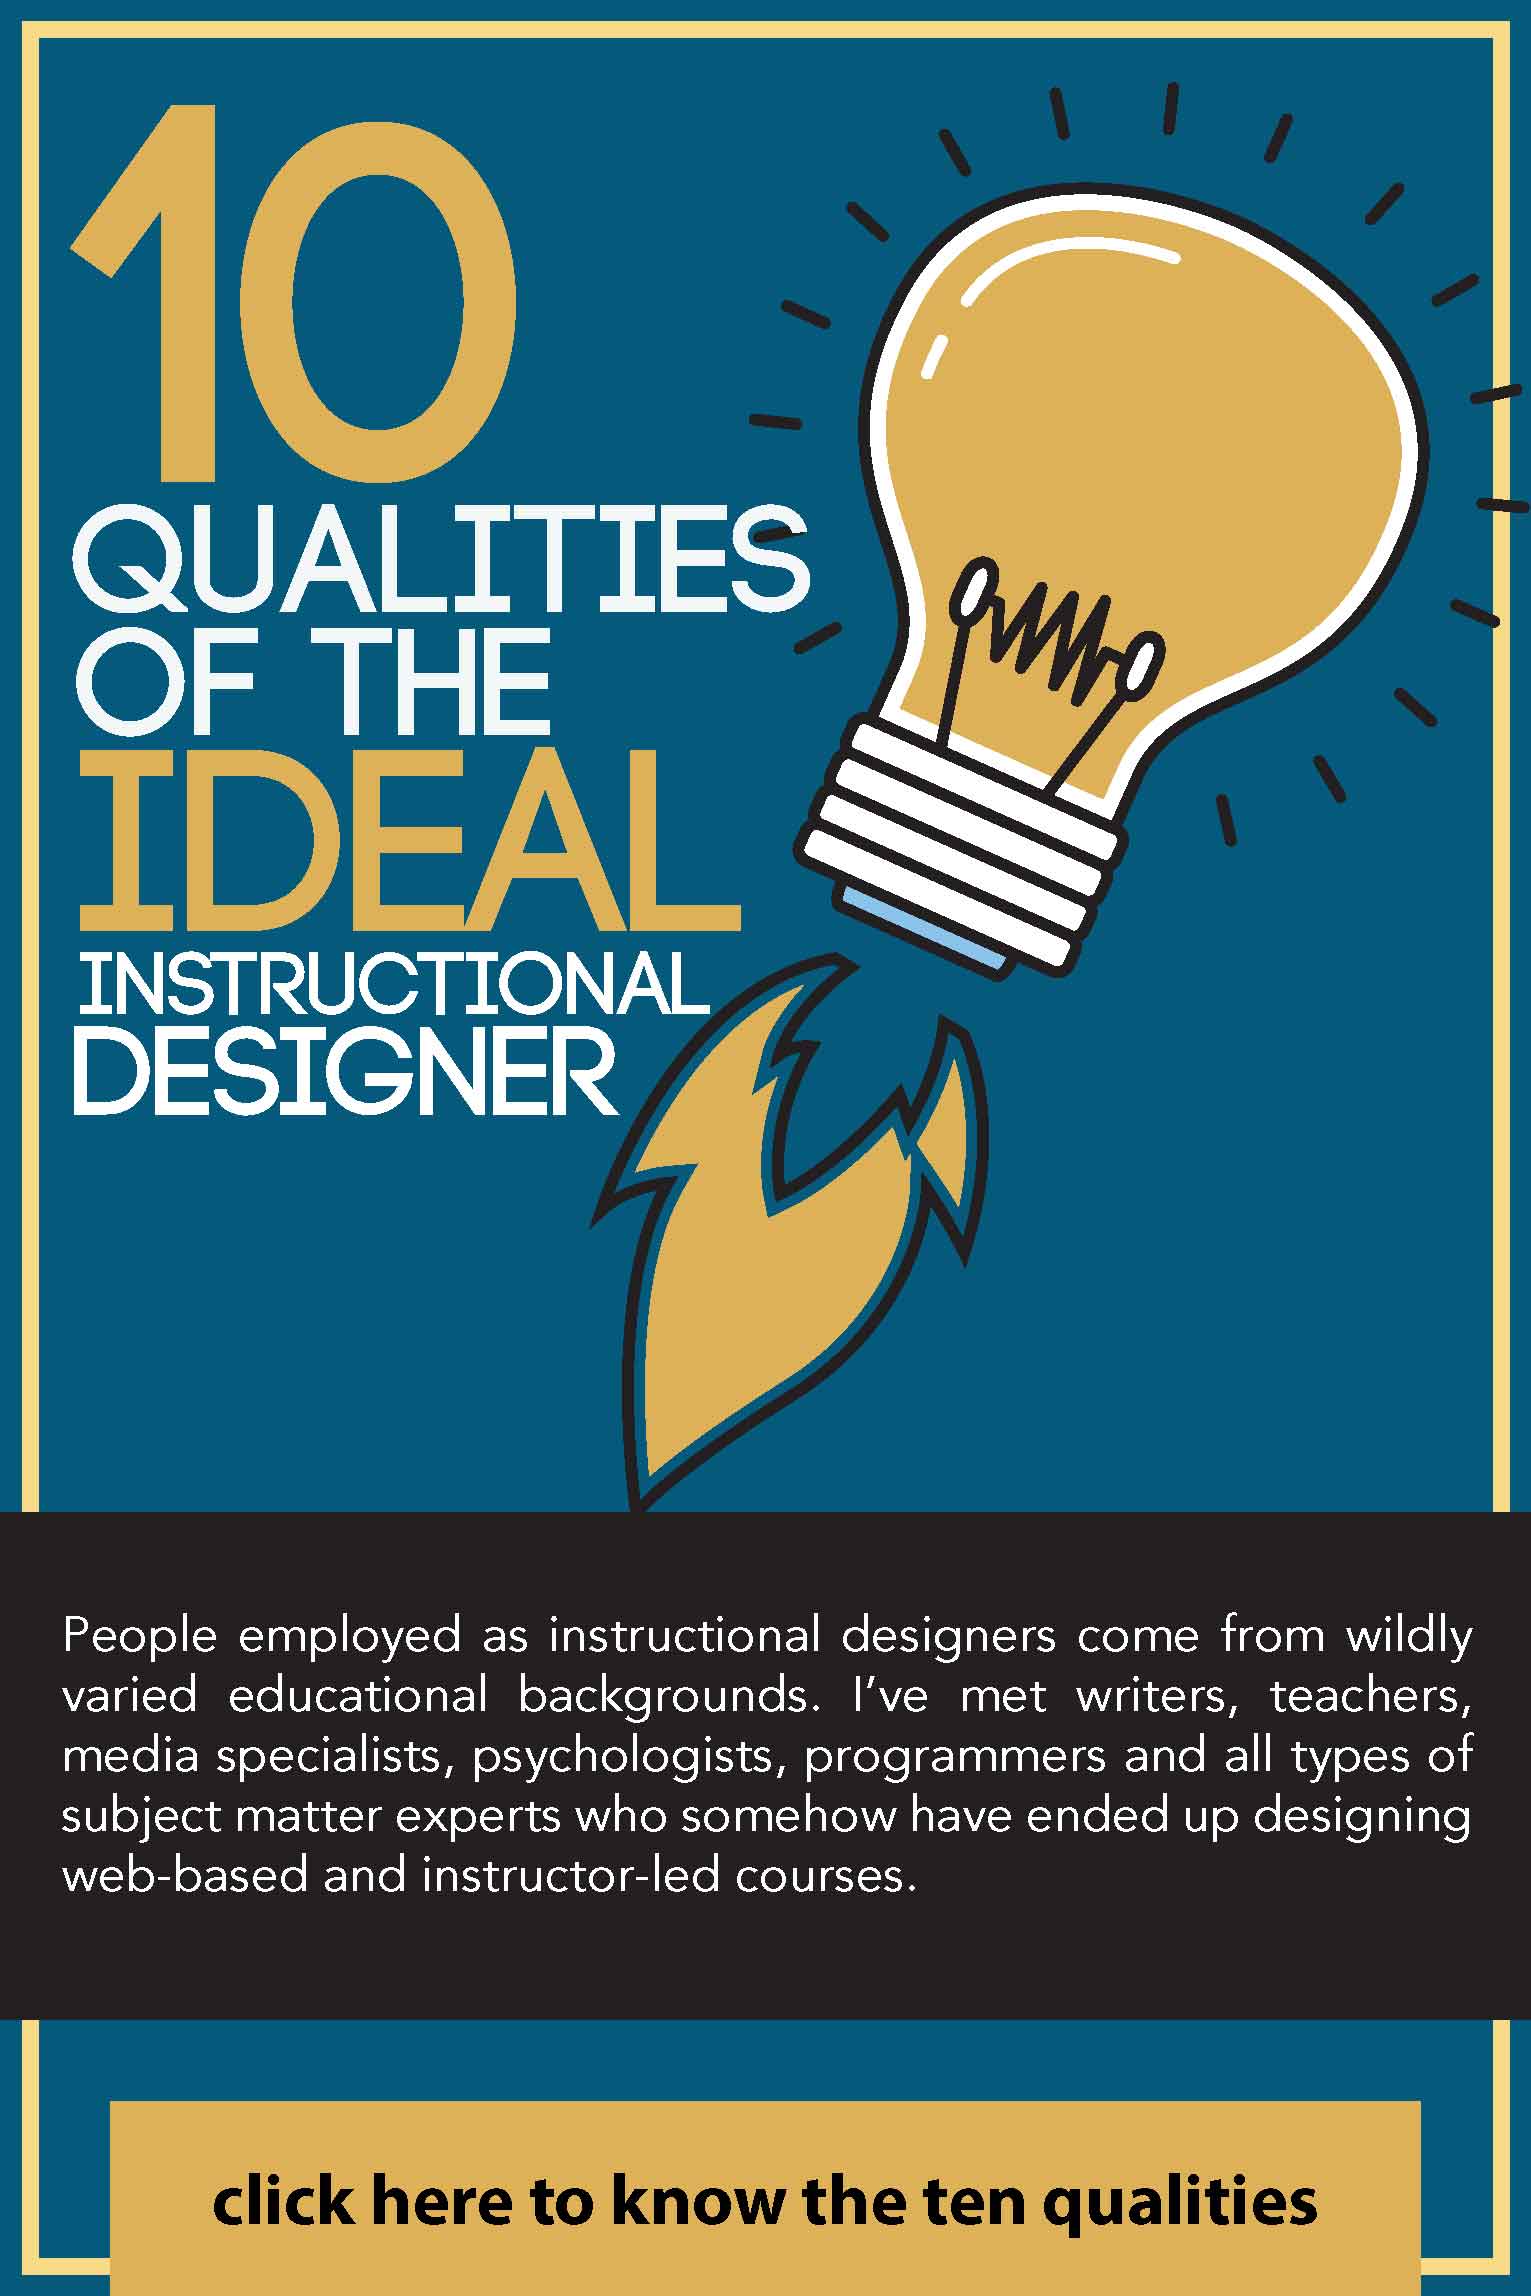 10 Qualities of the Ideal Instructional Designer